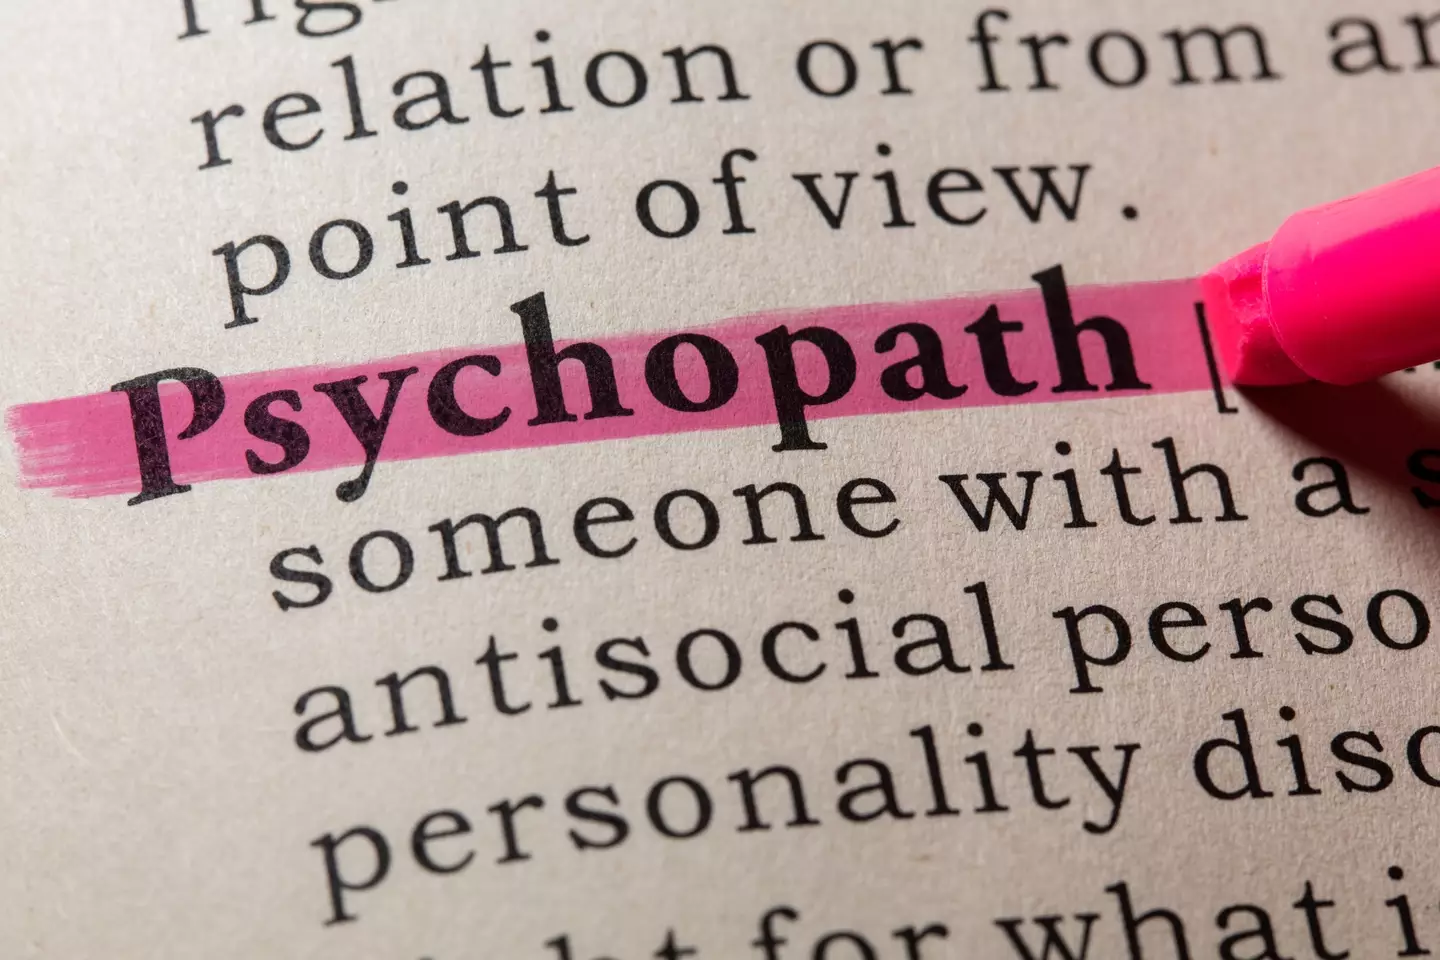 It's extremely rare to meet a psychopath.